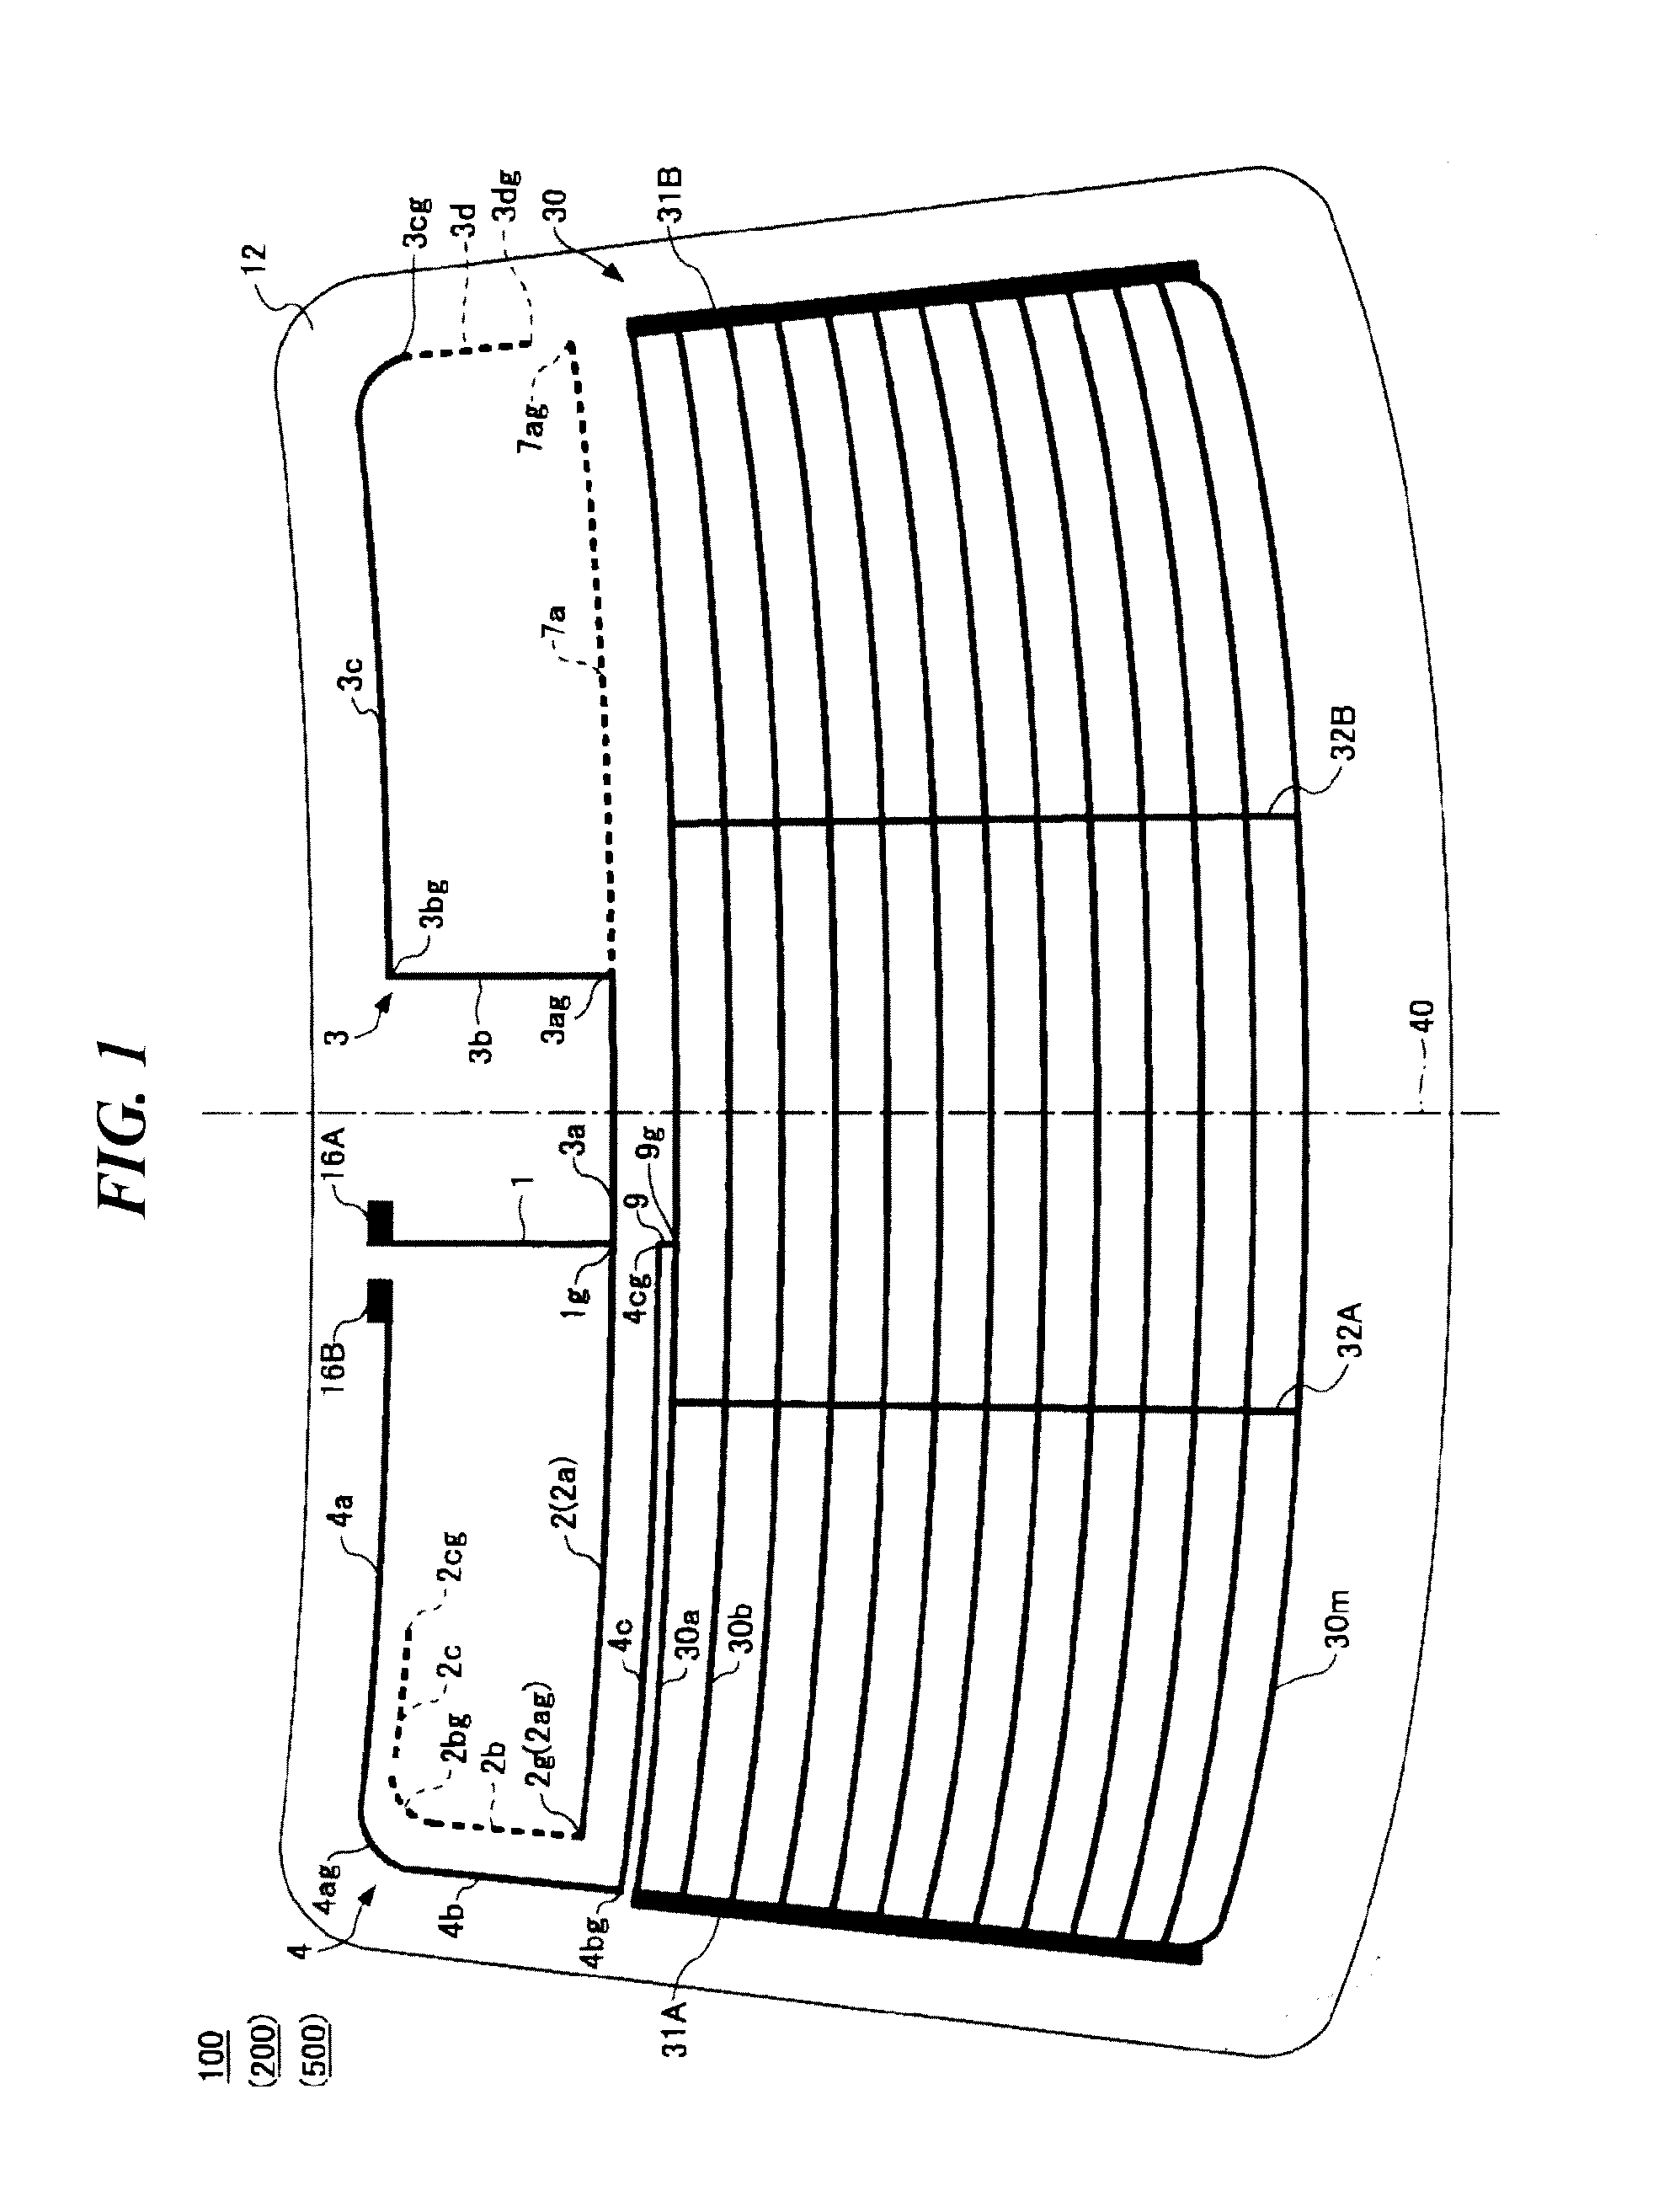 Glass antenna and window glass for vehicle